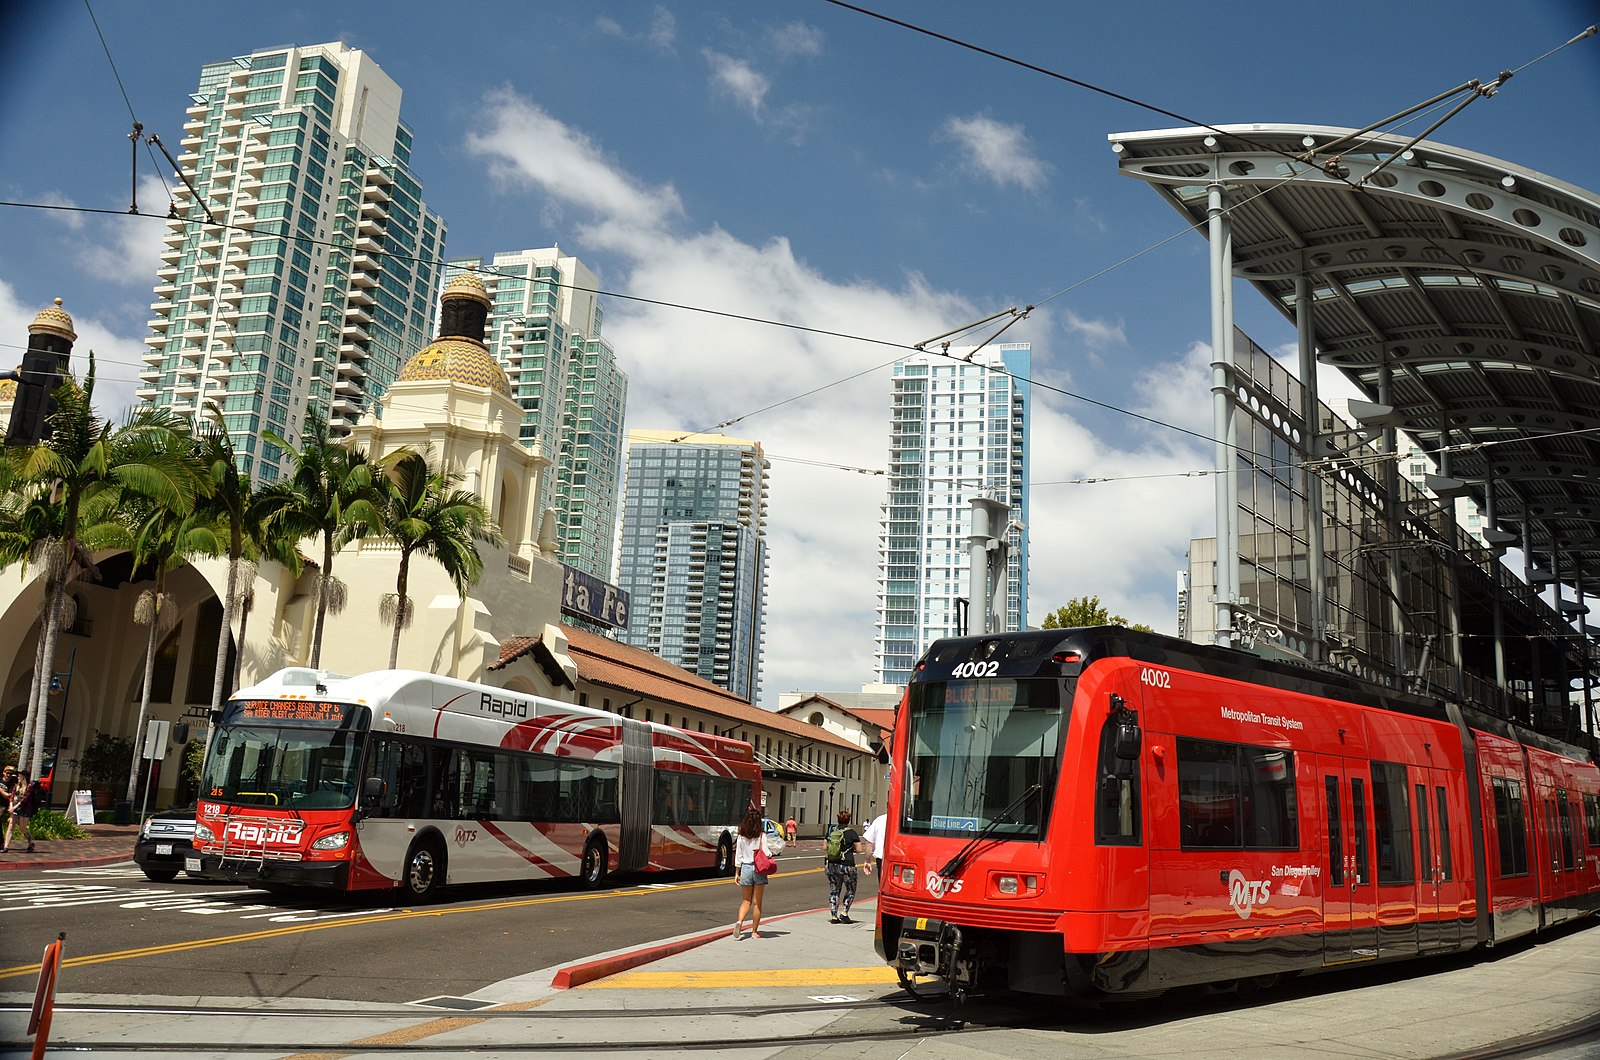 A red train and bus meet at an intersection in San Diego. Glass high rise building and palm trees are in the background.